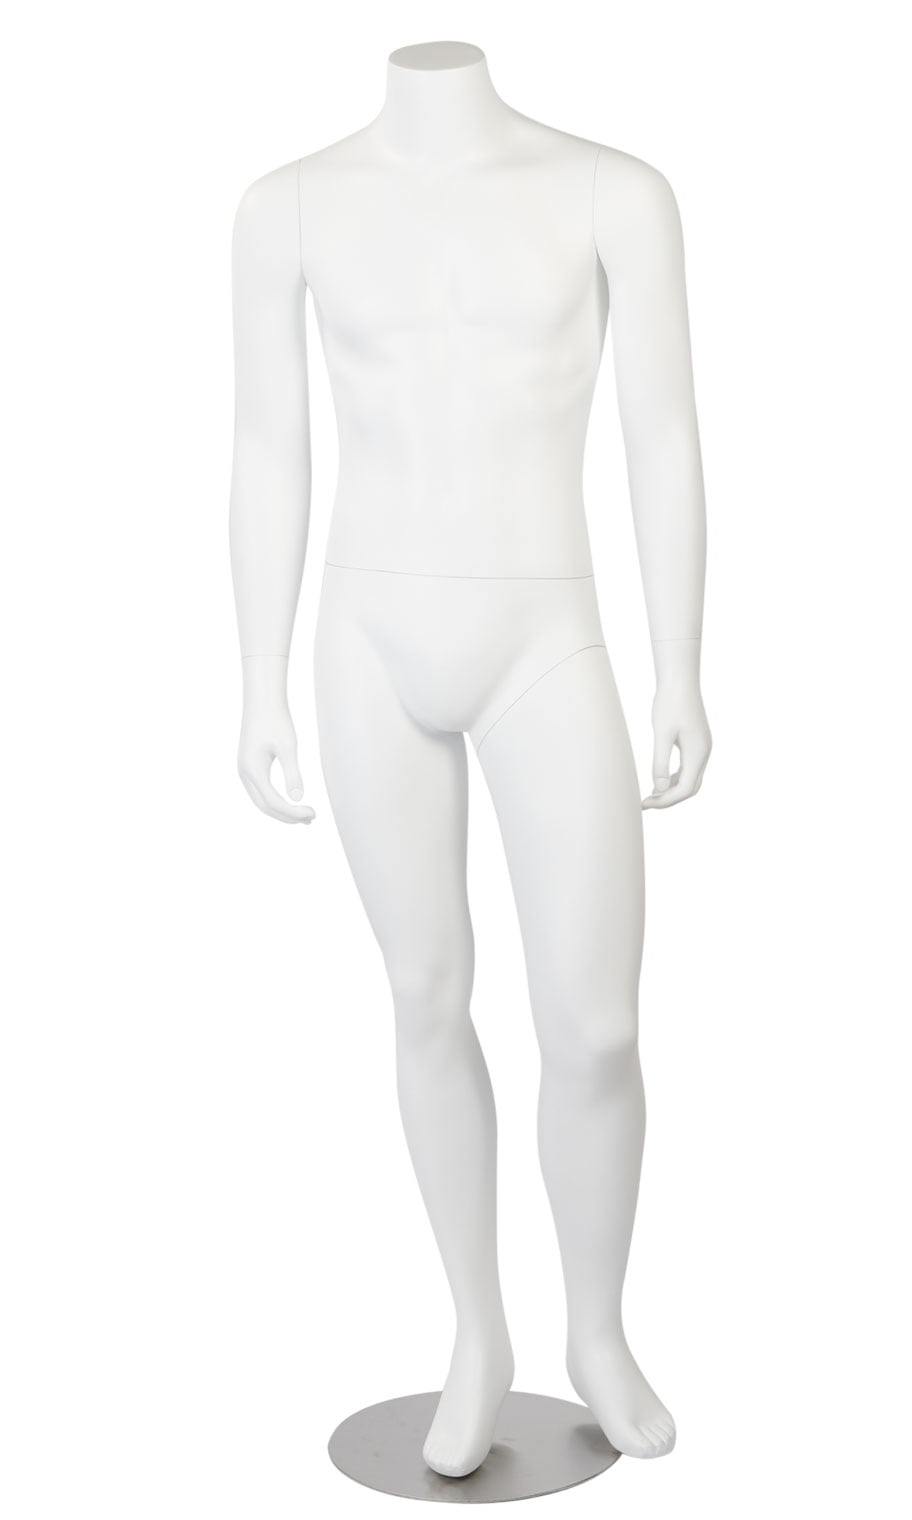 Details about   5 ft 8 in White Male Mannequin Feature Face Small size WWI or II Uniform RO1WT